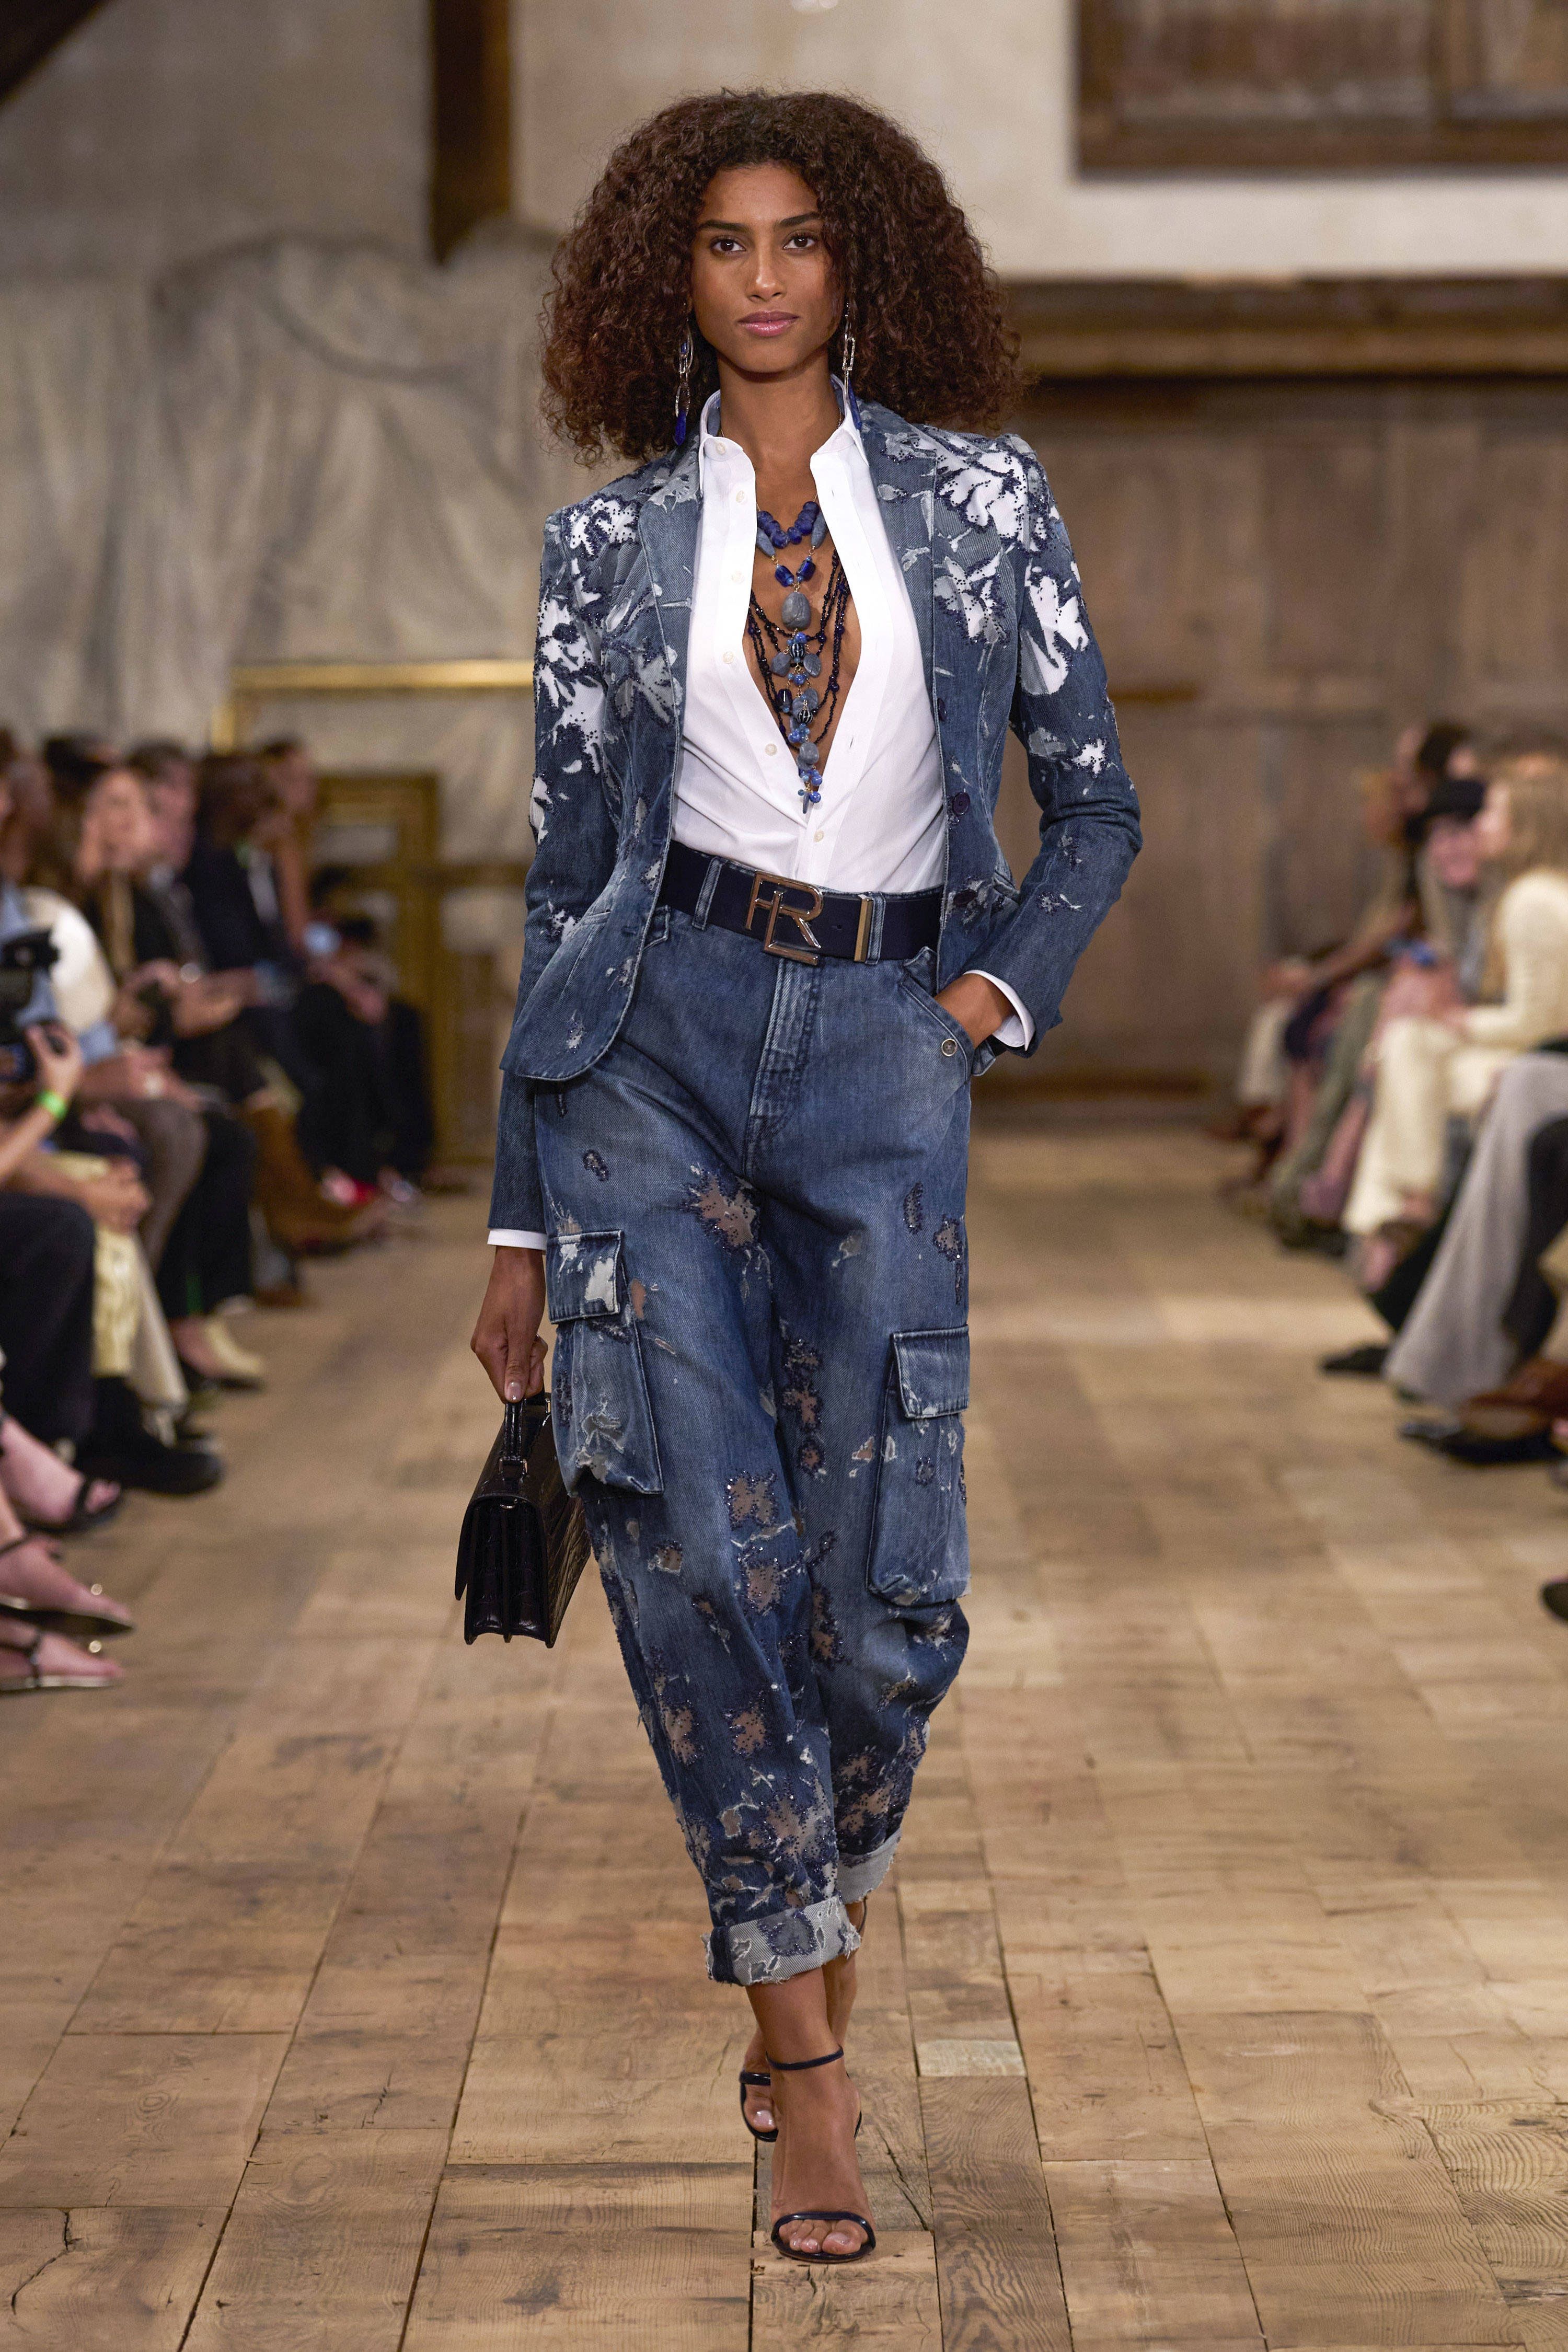 Mandatory Credit: Photo by courtesy via Pixelformula/SIPA/Shutterstock (14091911i)
A model wearing an original creation from the womenswear summer 2024 collections in New York from the house of Ralph Lauren
Womenswear, summer 2024, New York, Ralph Lauren, Usa - 08 Sep 2023